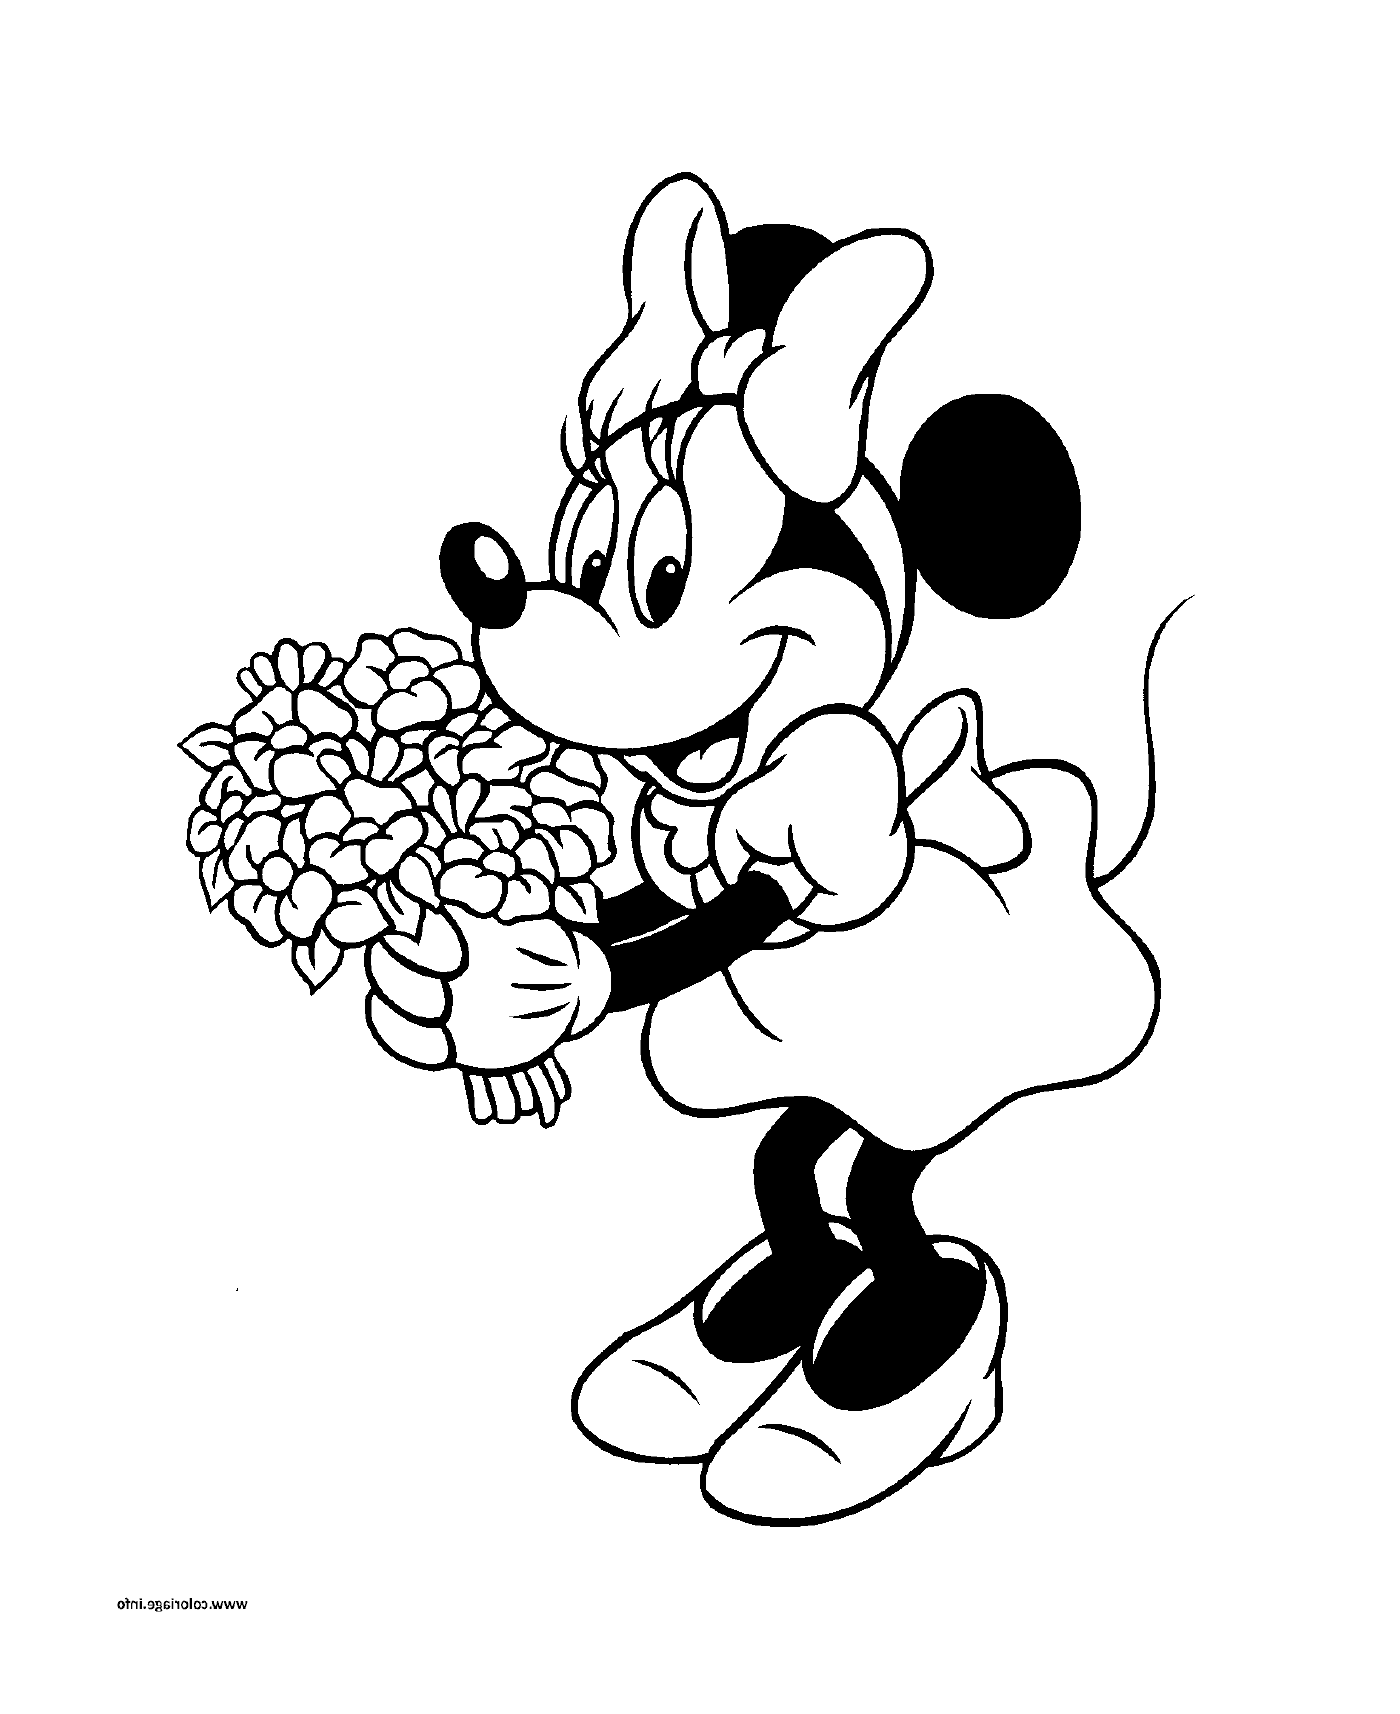  Minnie Mouse has a bouquet of flowers 